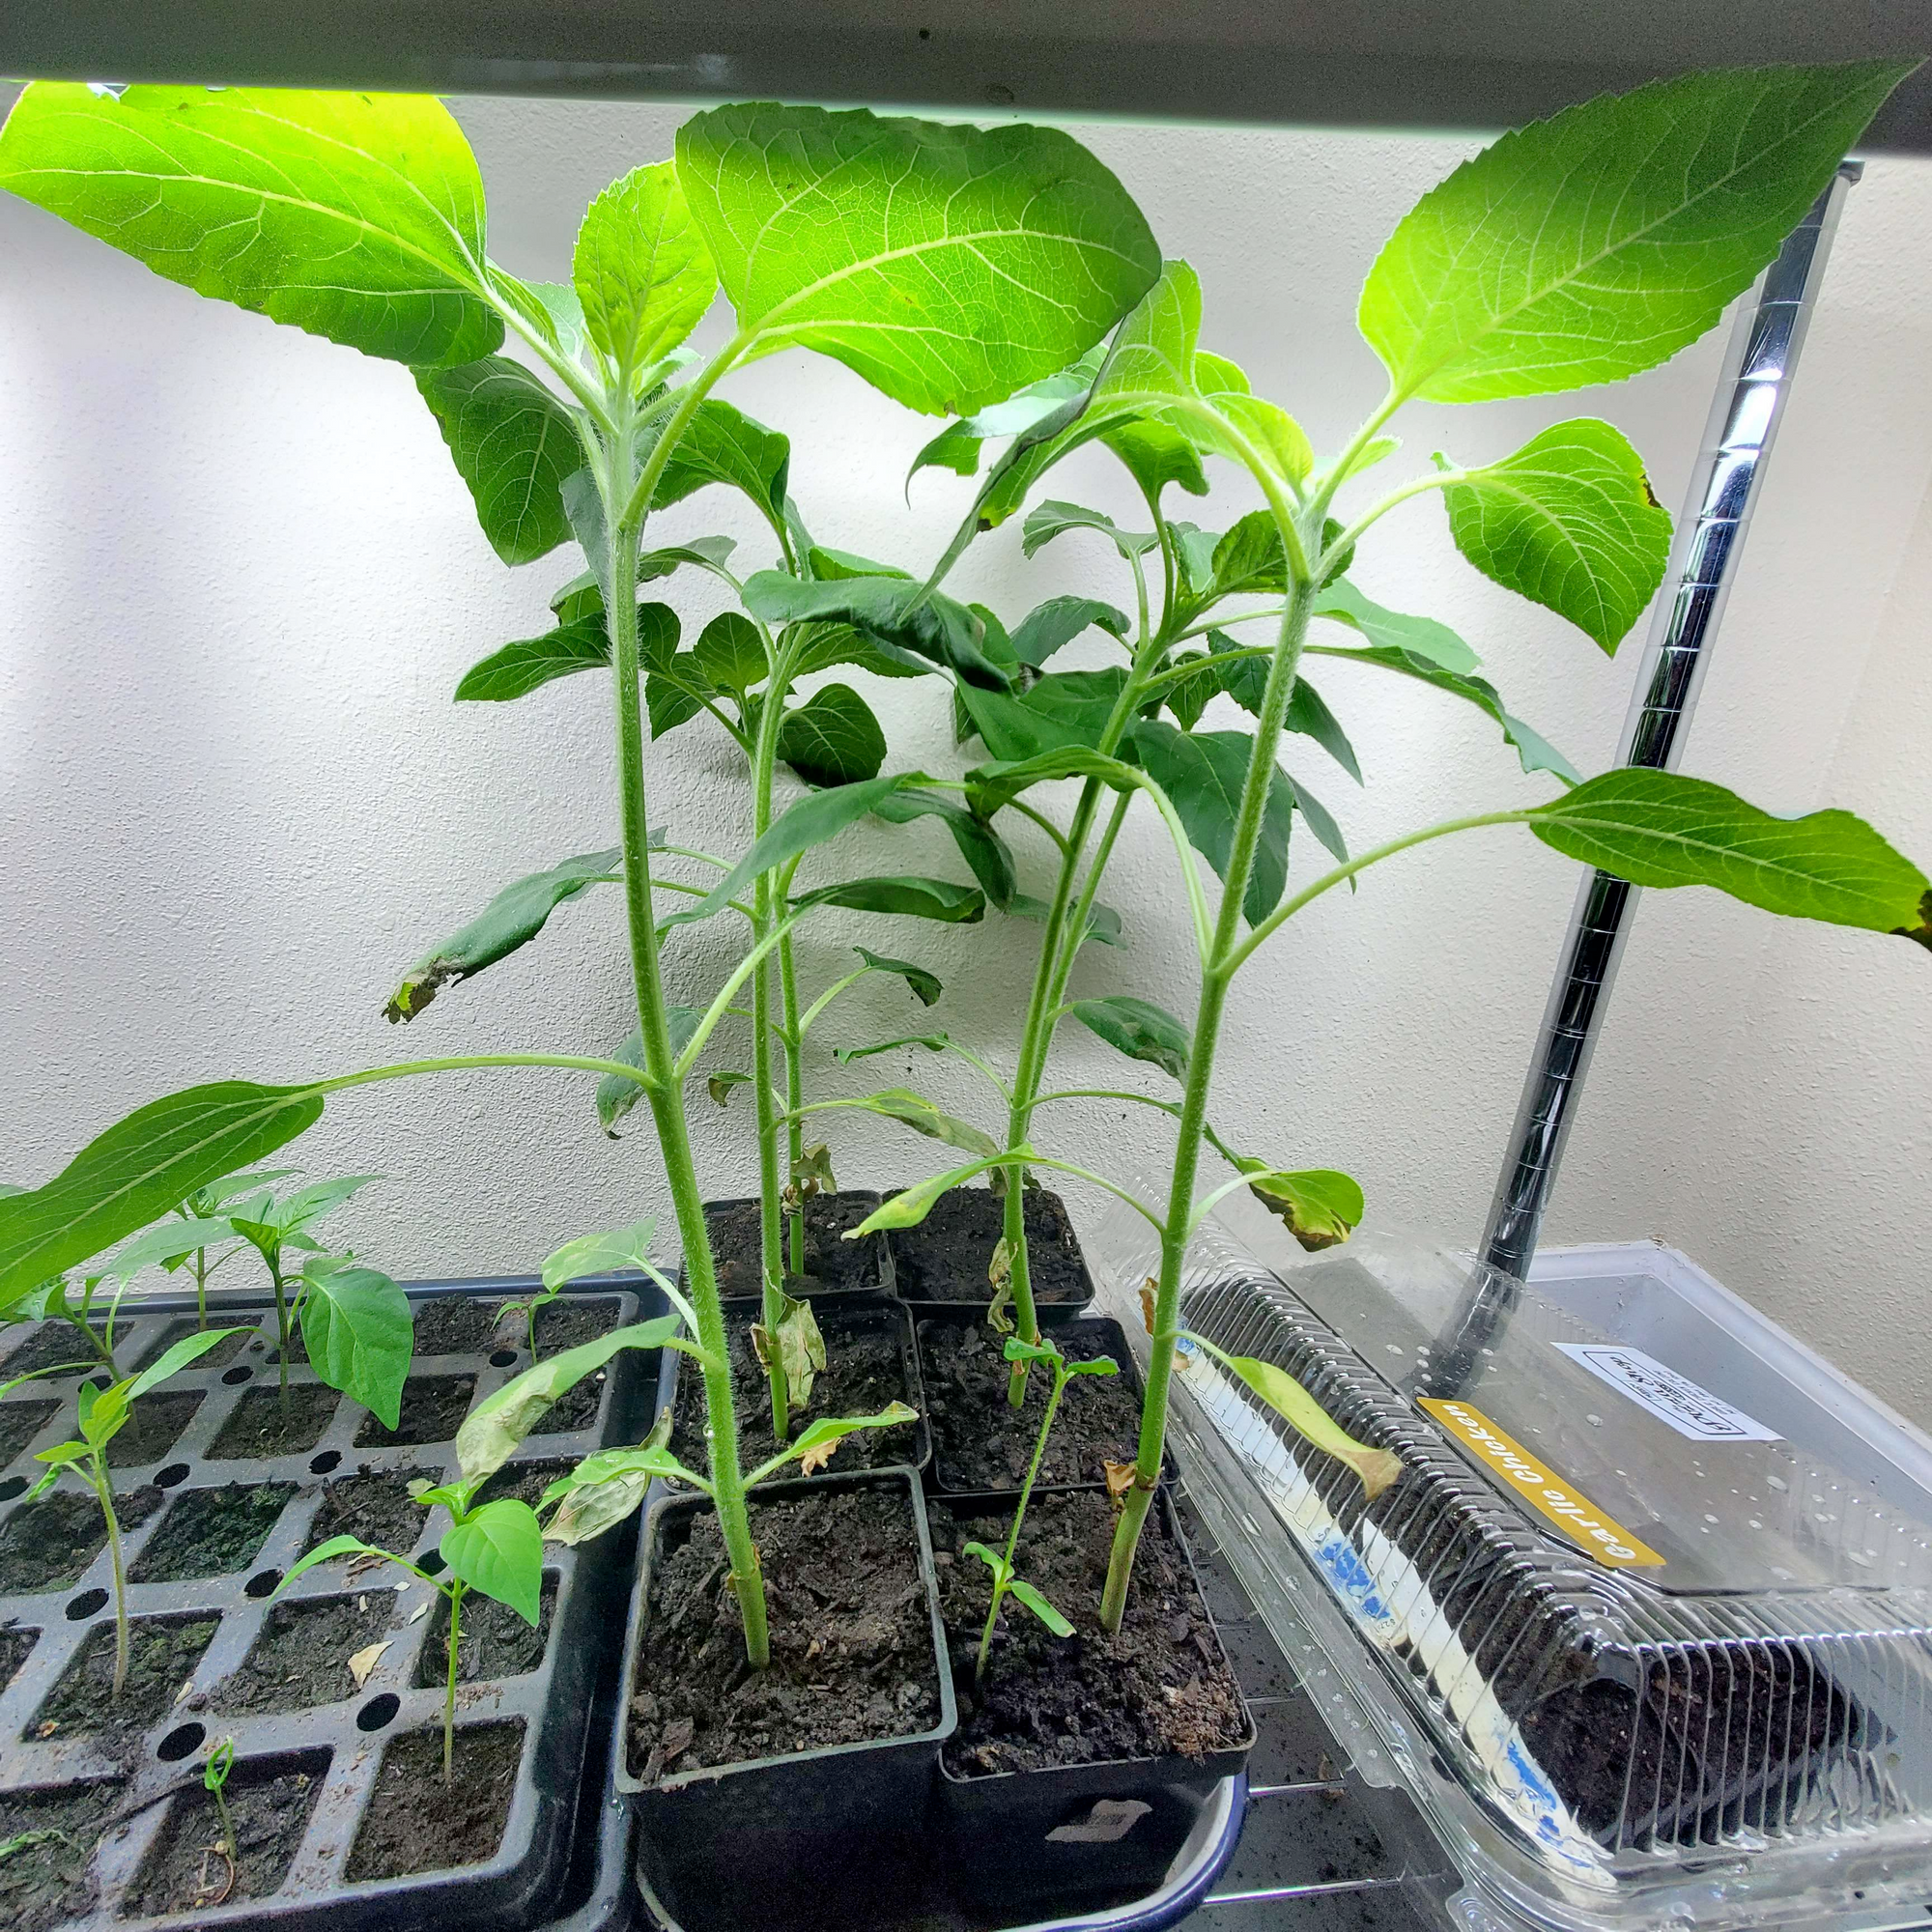 Photo of leaves growing in trays with grow lights